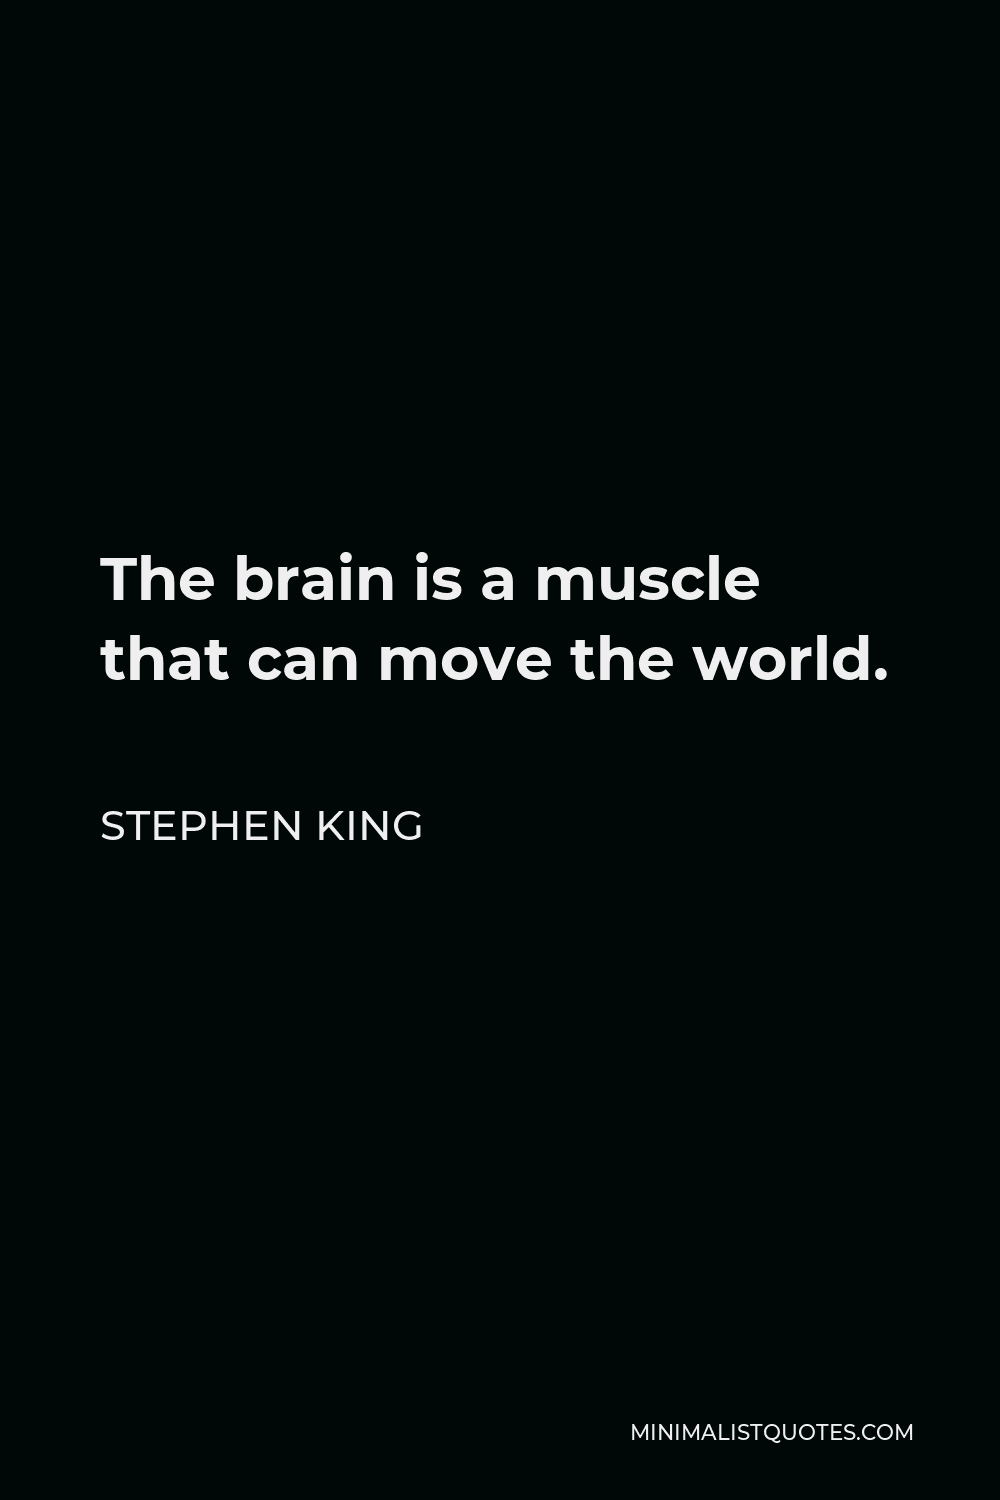 Stephen King Quote - The brain is a muscle that can move the world.